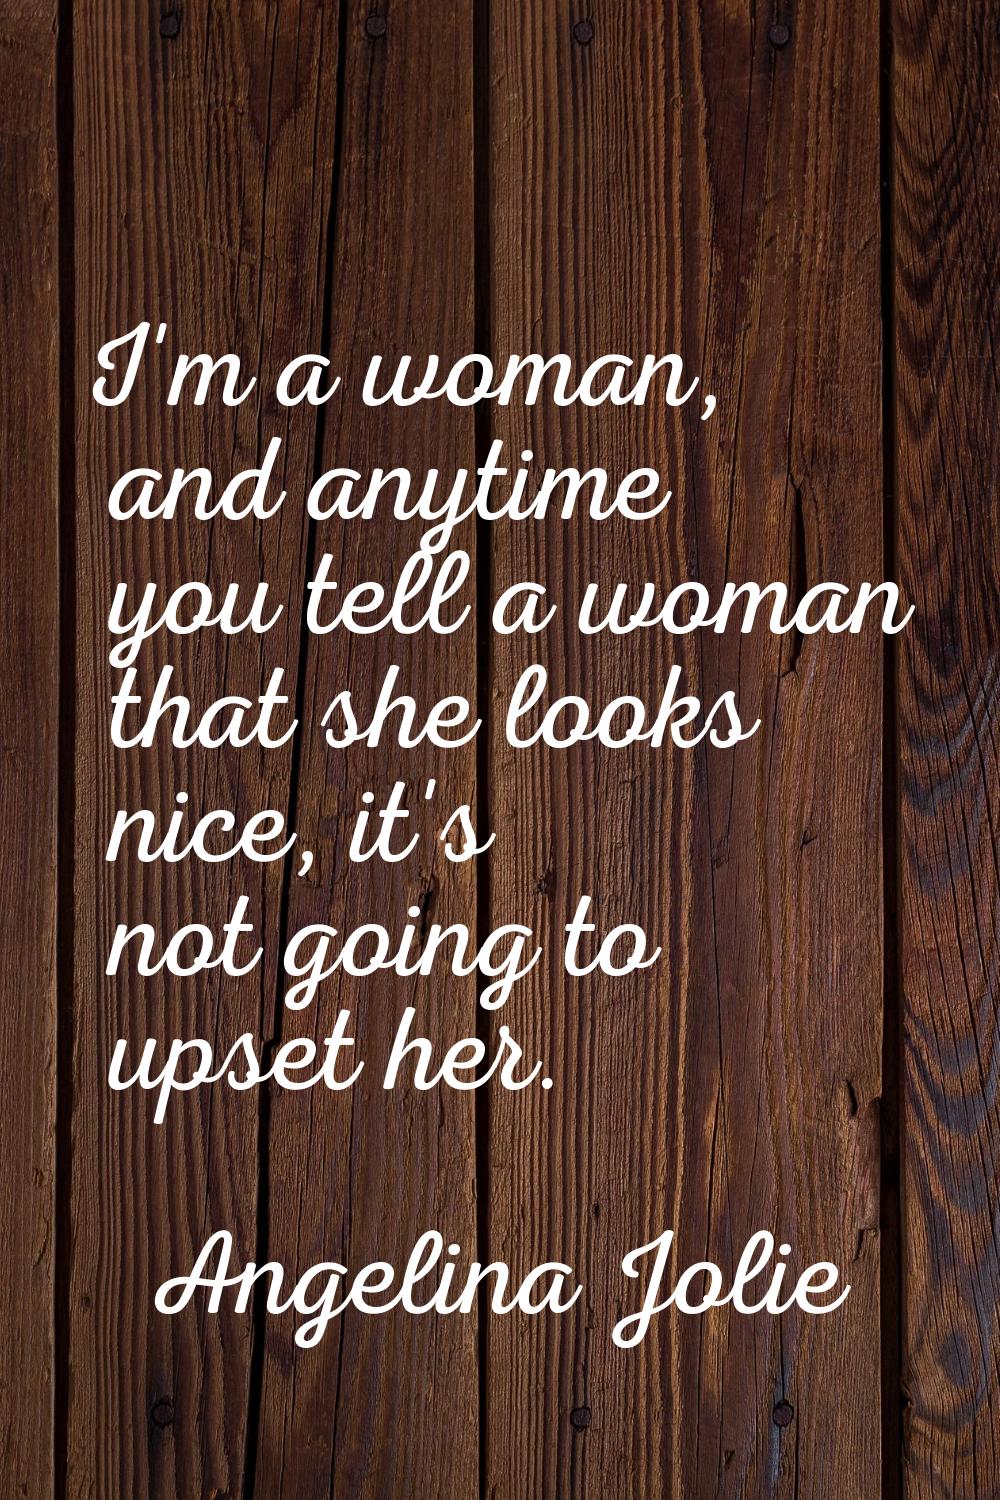 I'm a woman, and anytime you tell a woman that she looks nice, it's not going to upset her.